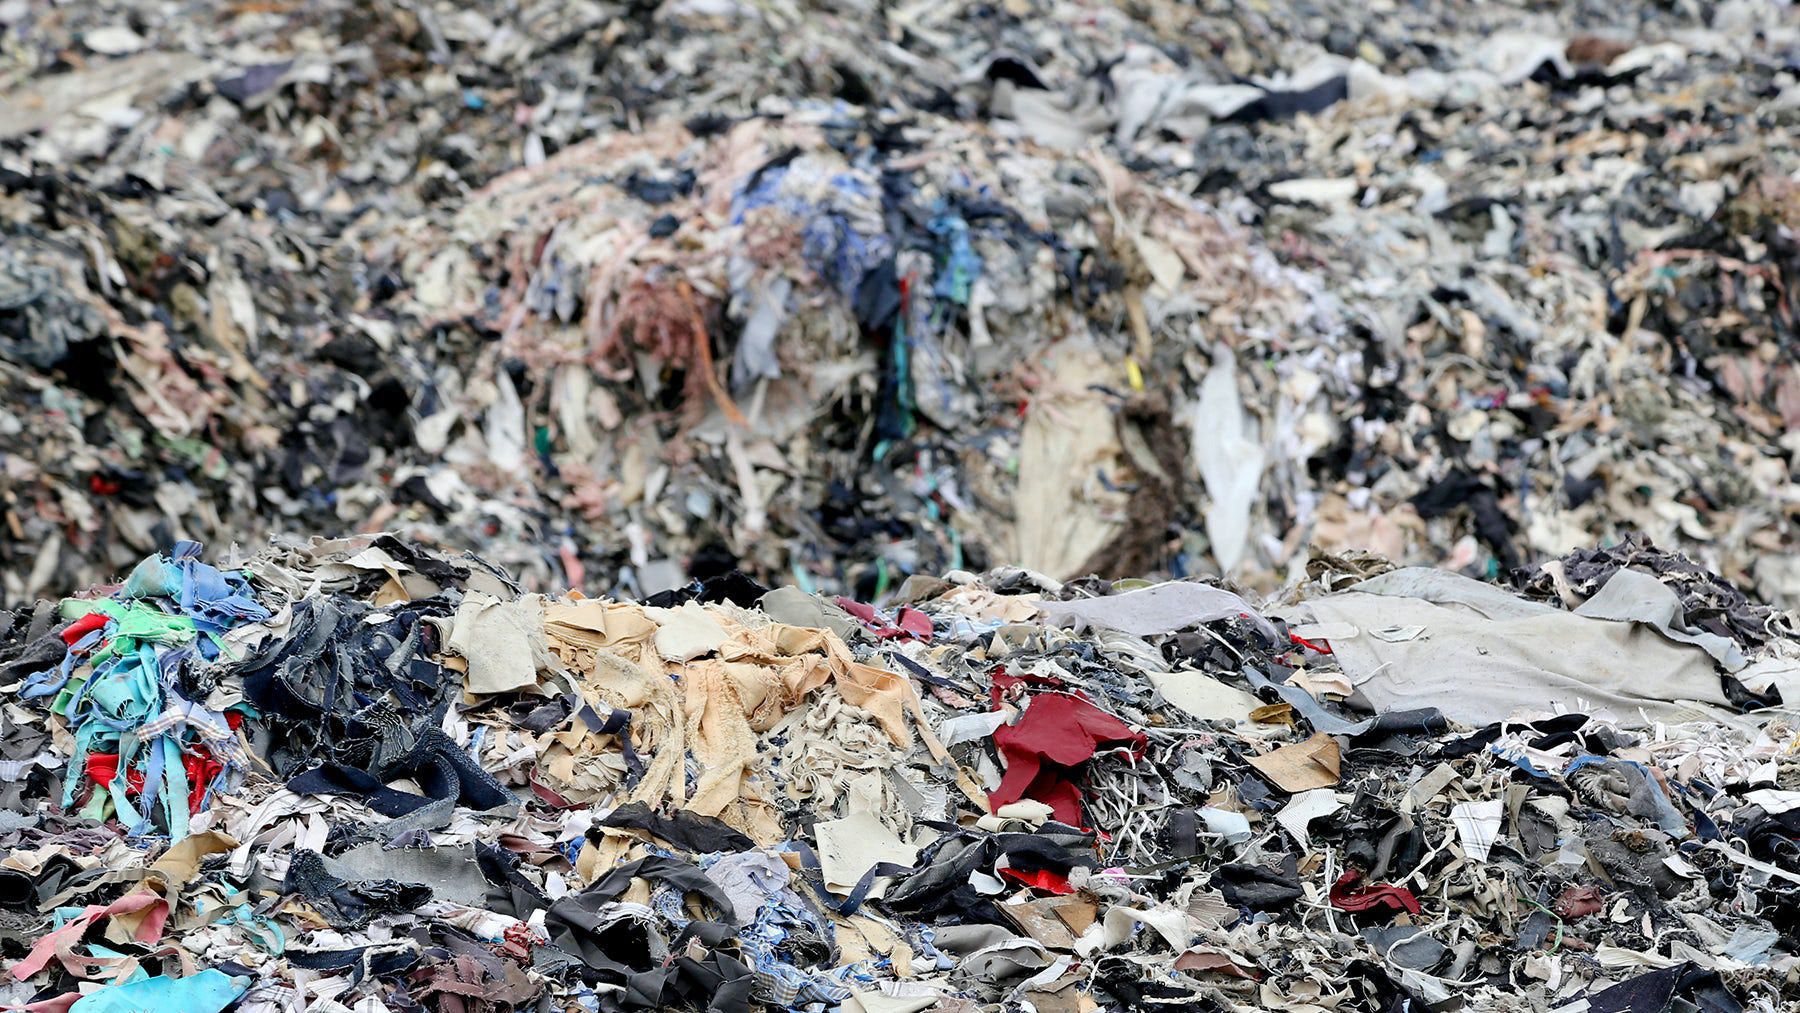 EU Wants All Textile Waste Regulations Ready by 2028